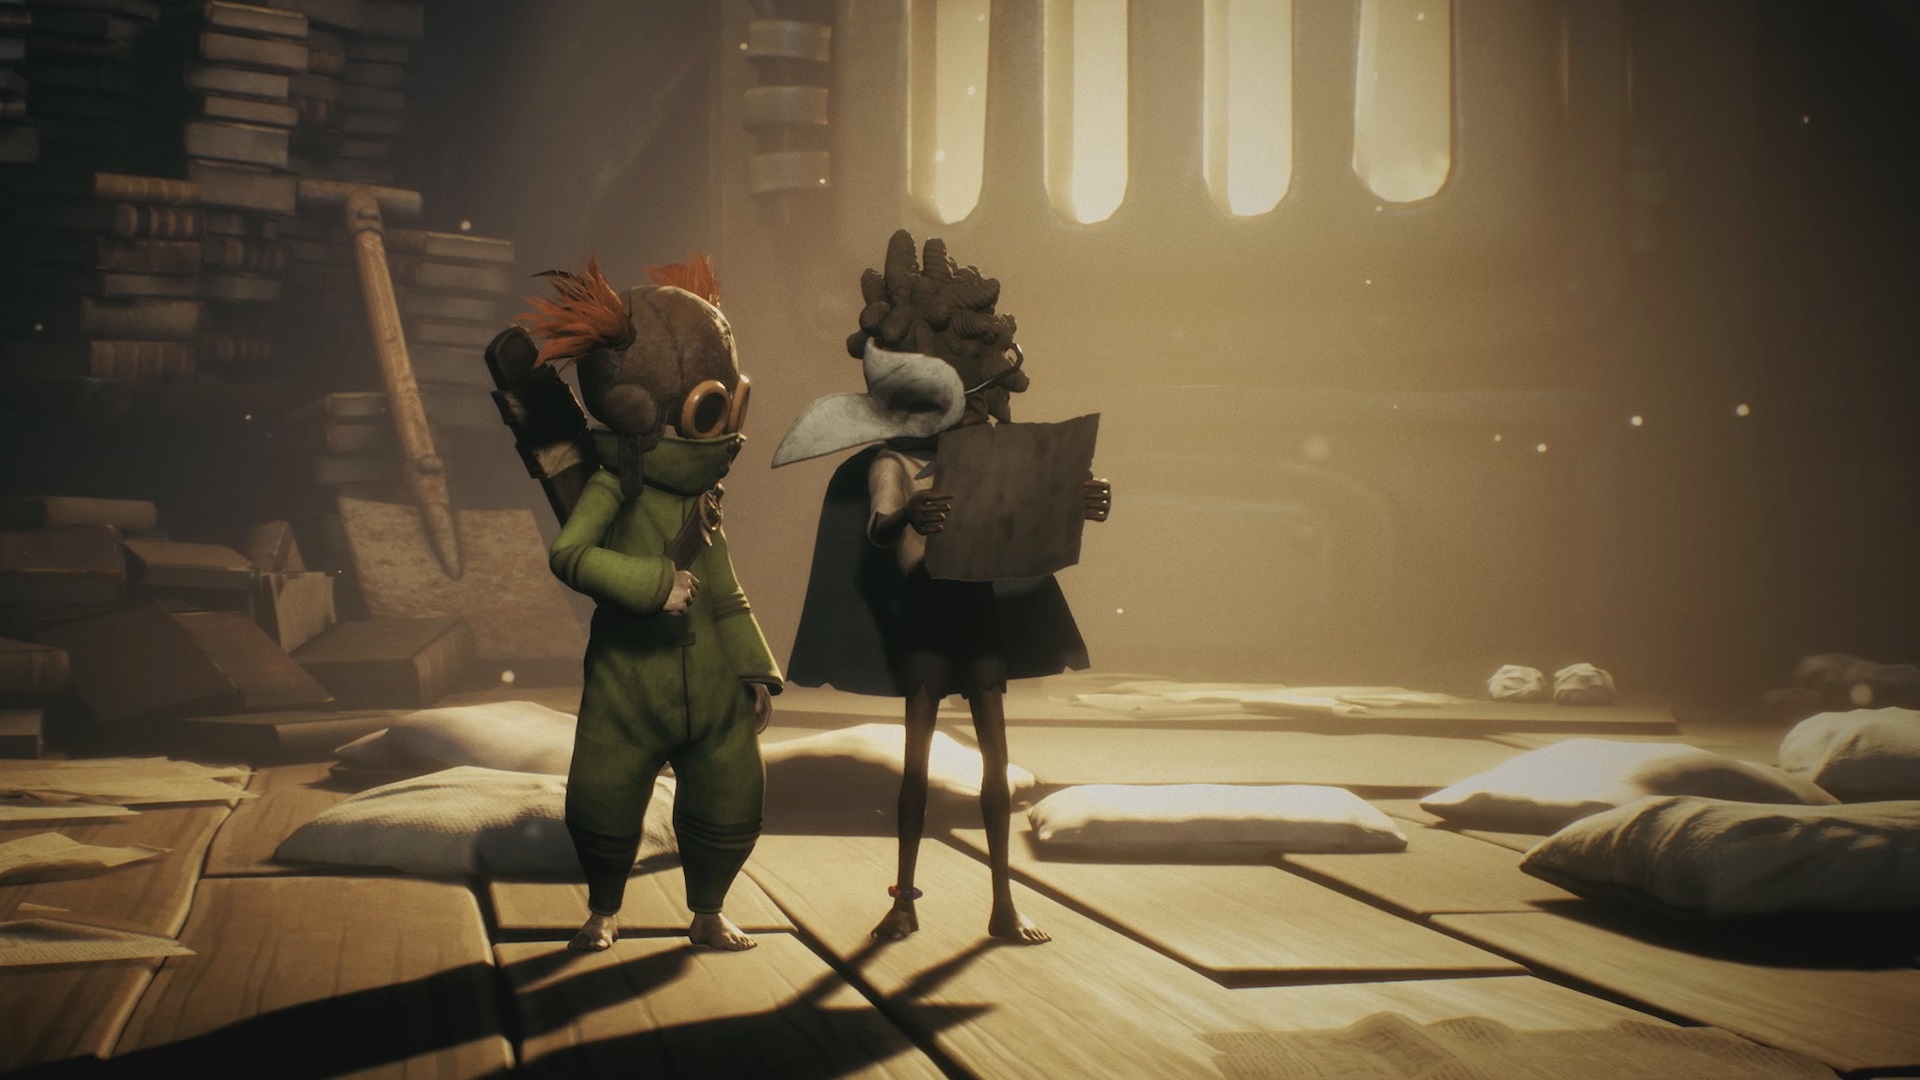 Little Nightmares 3 will feature two new protagonists, but fans